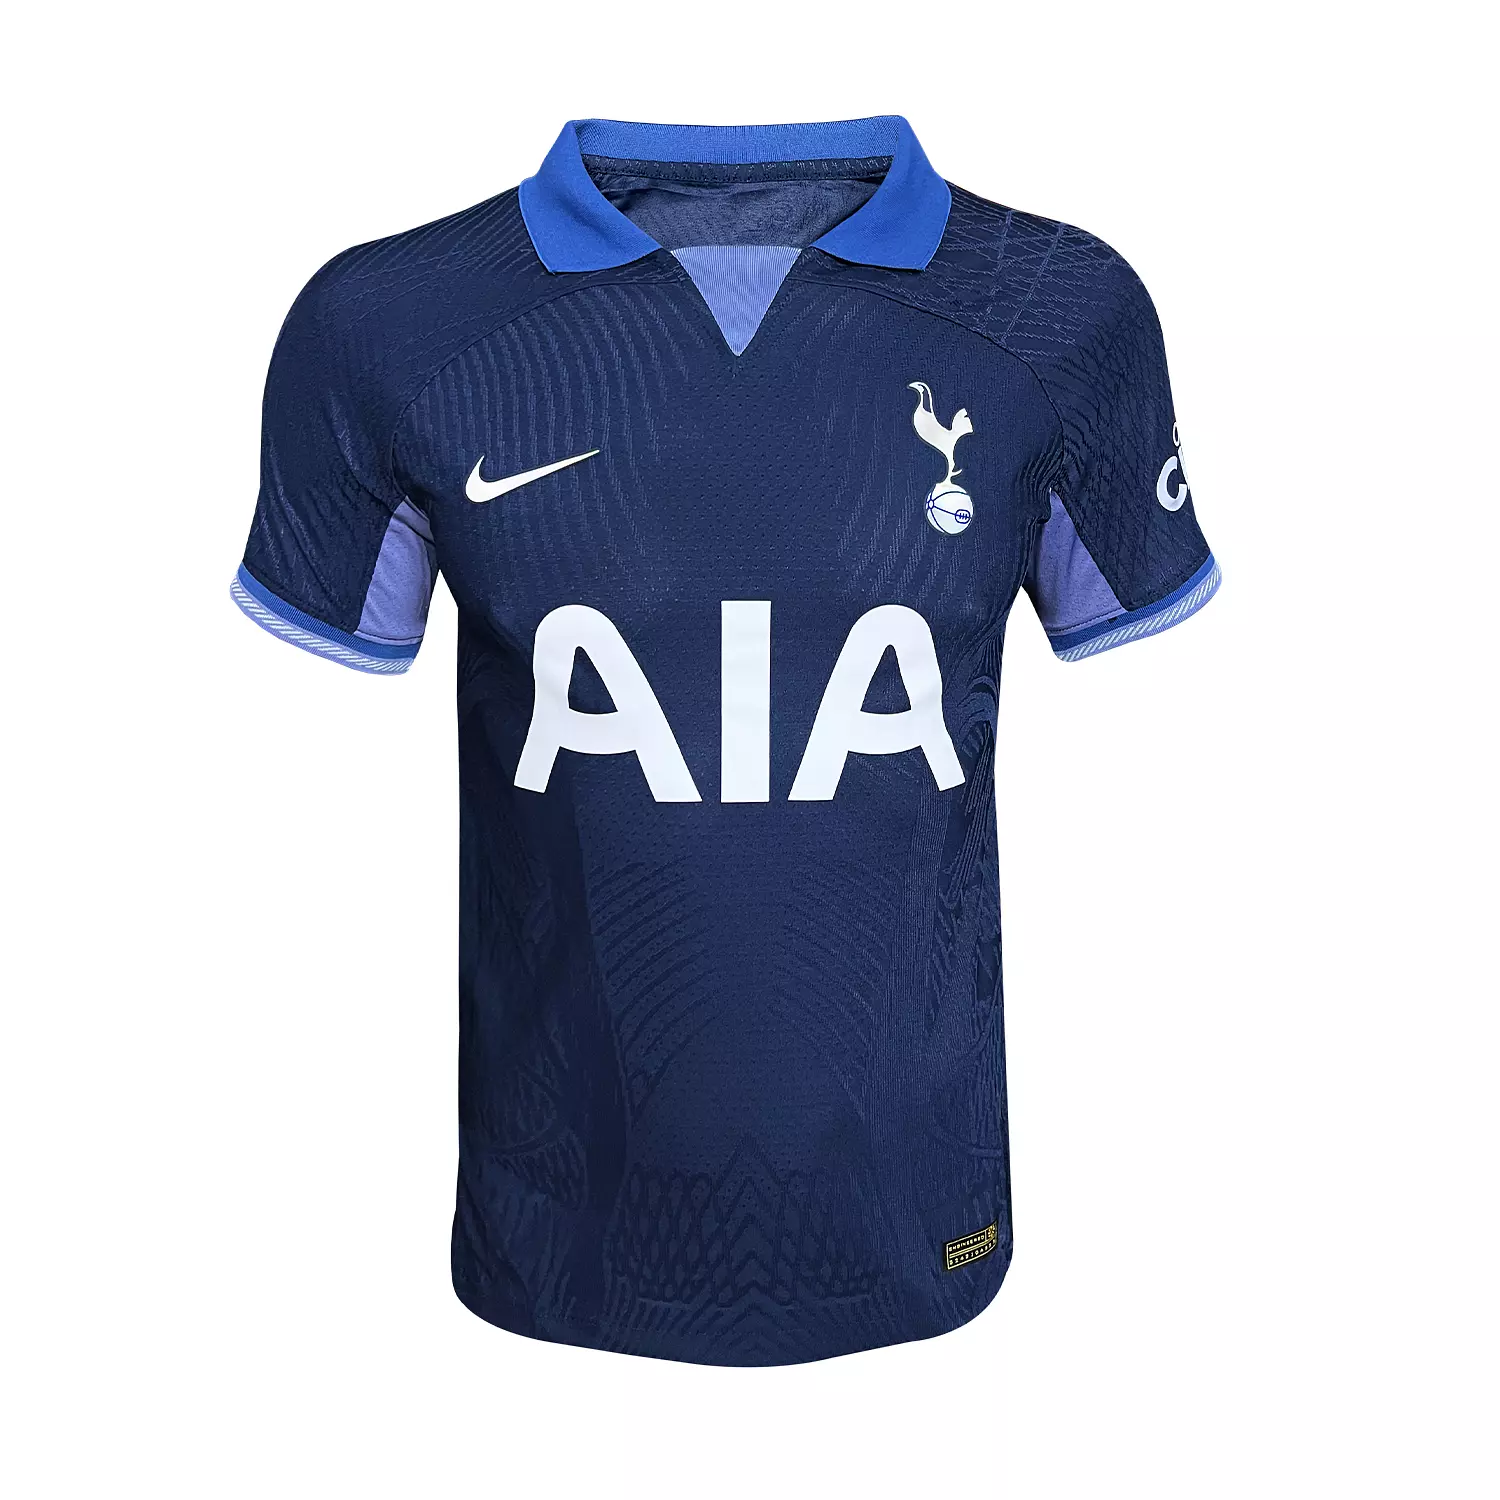 TOTTENHAM 23/24 - PLAYER hover image